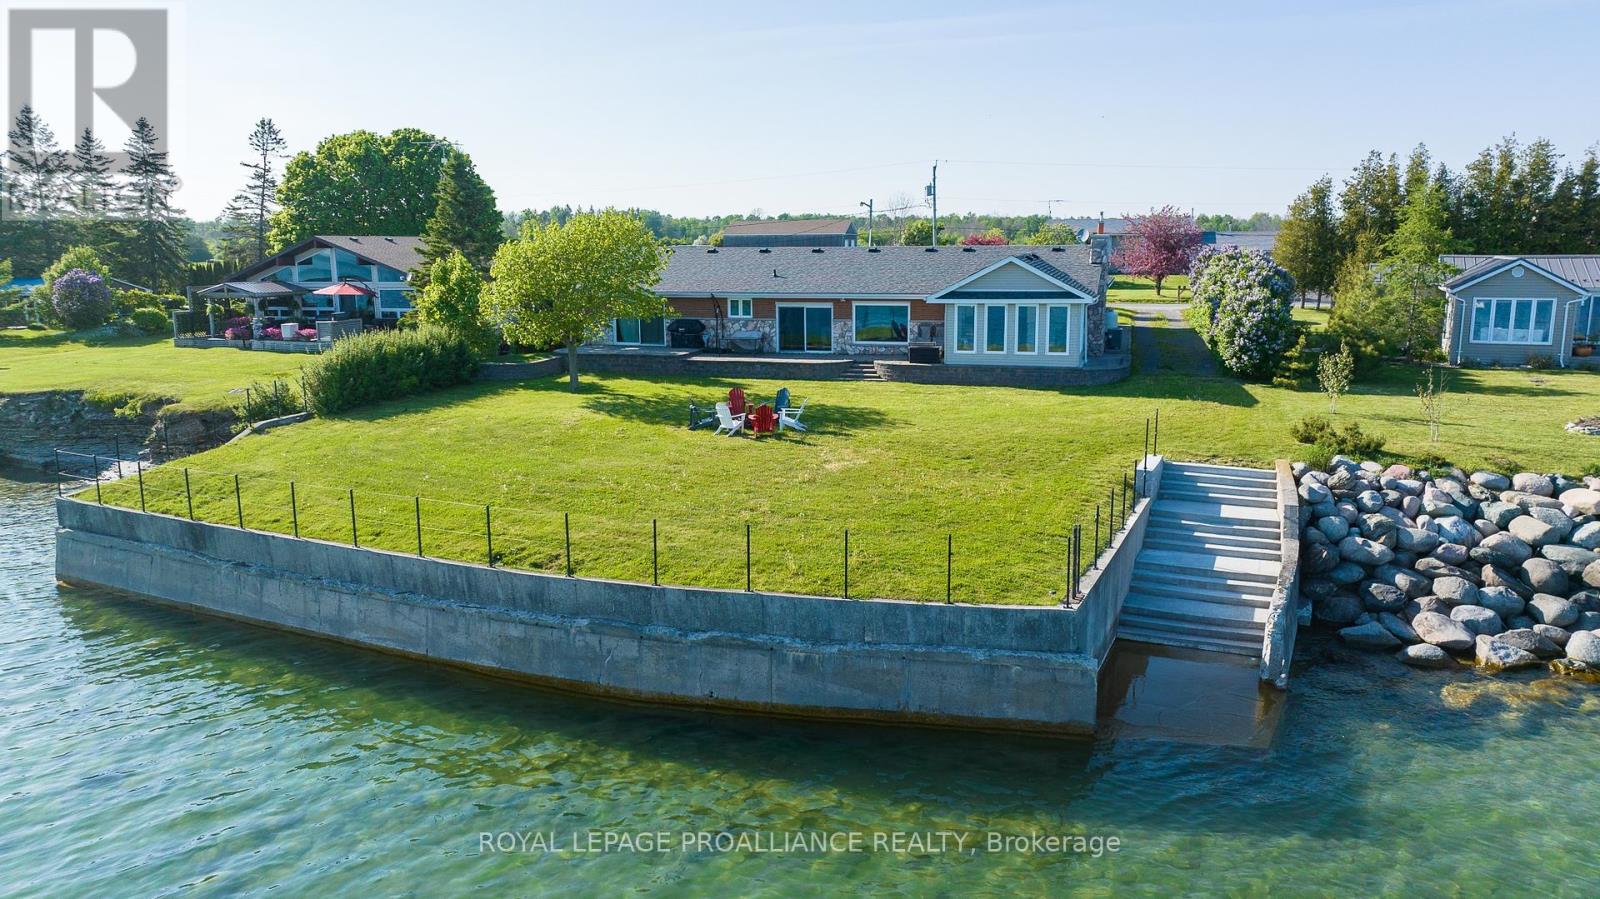 605 BARCOVAN BEACH RD located in Quinte West, Ontario